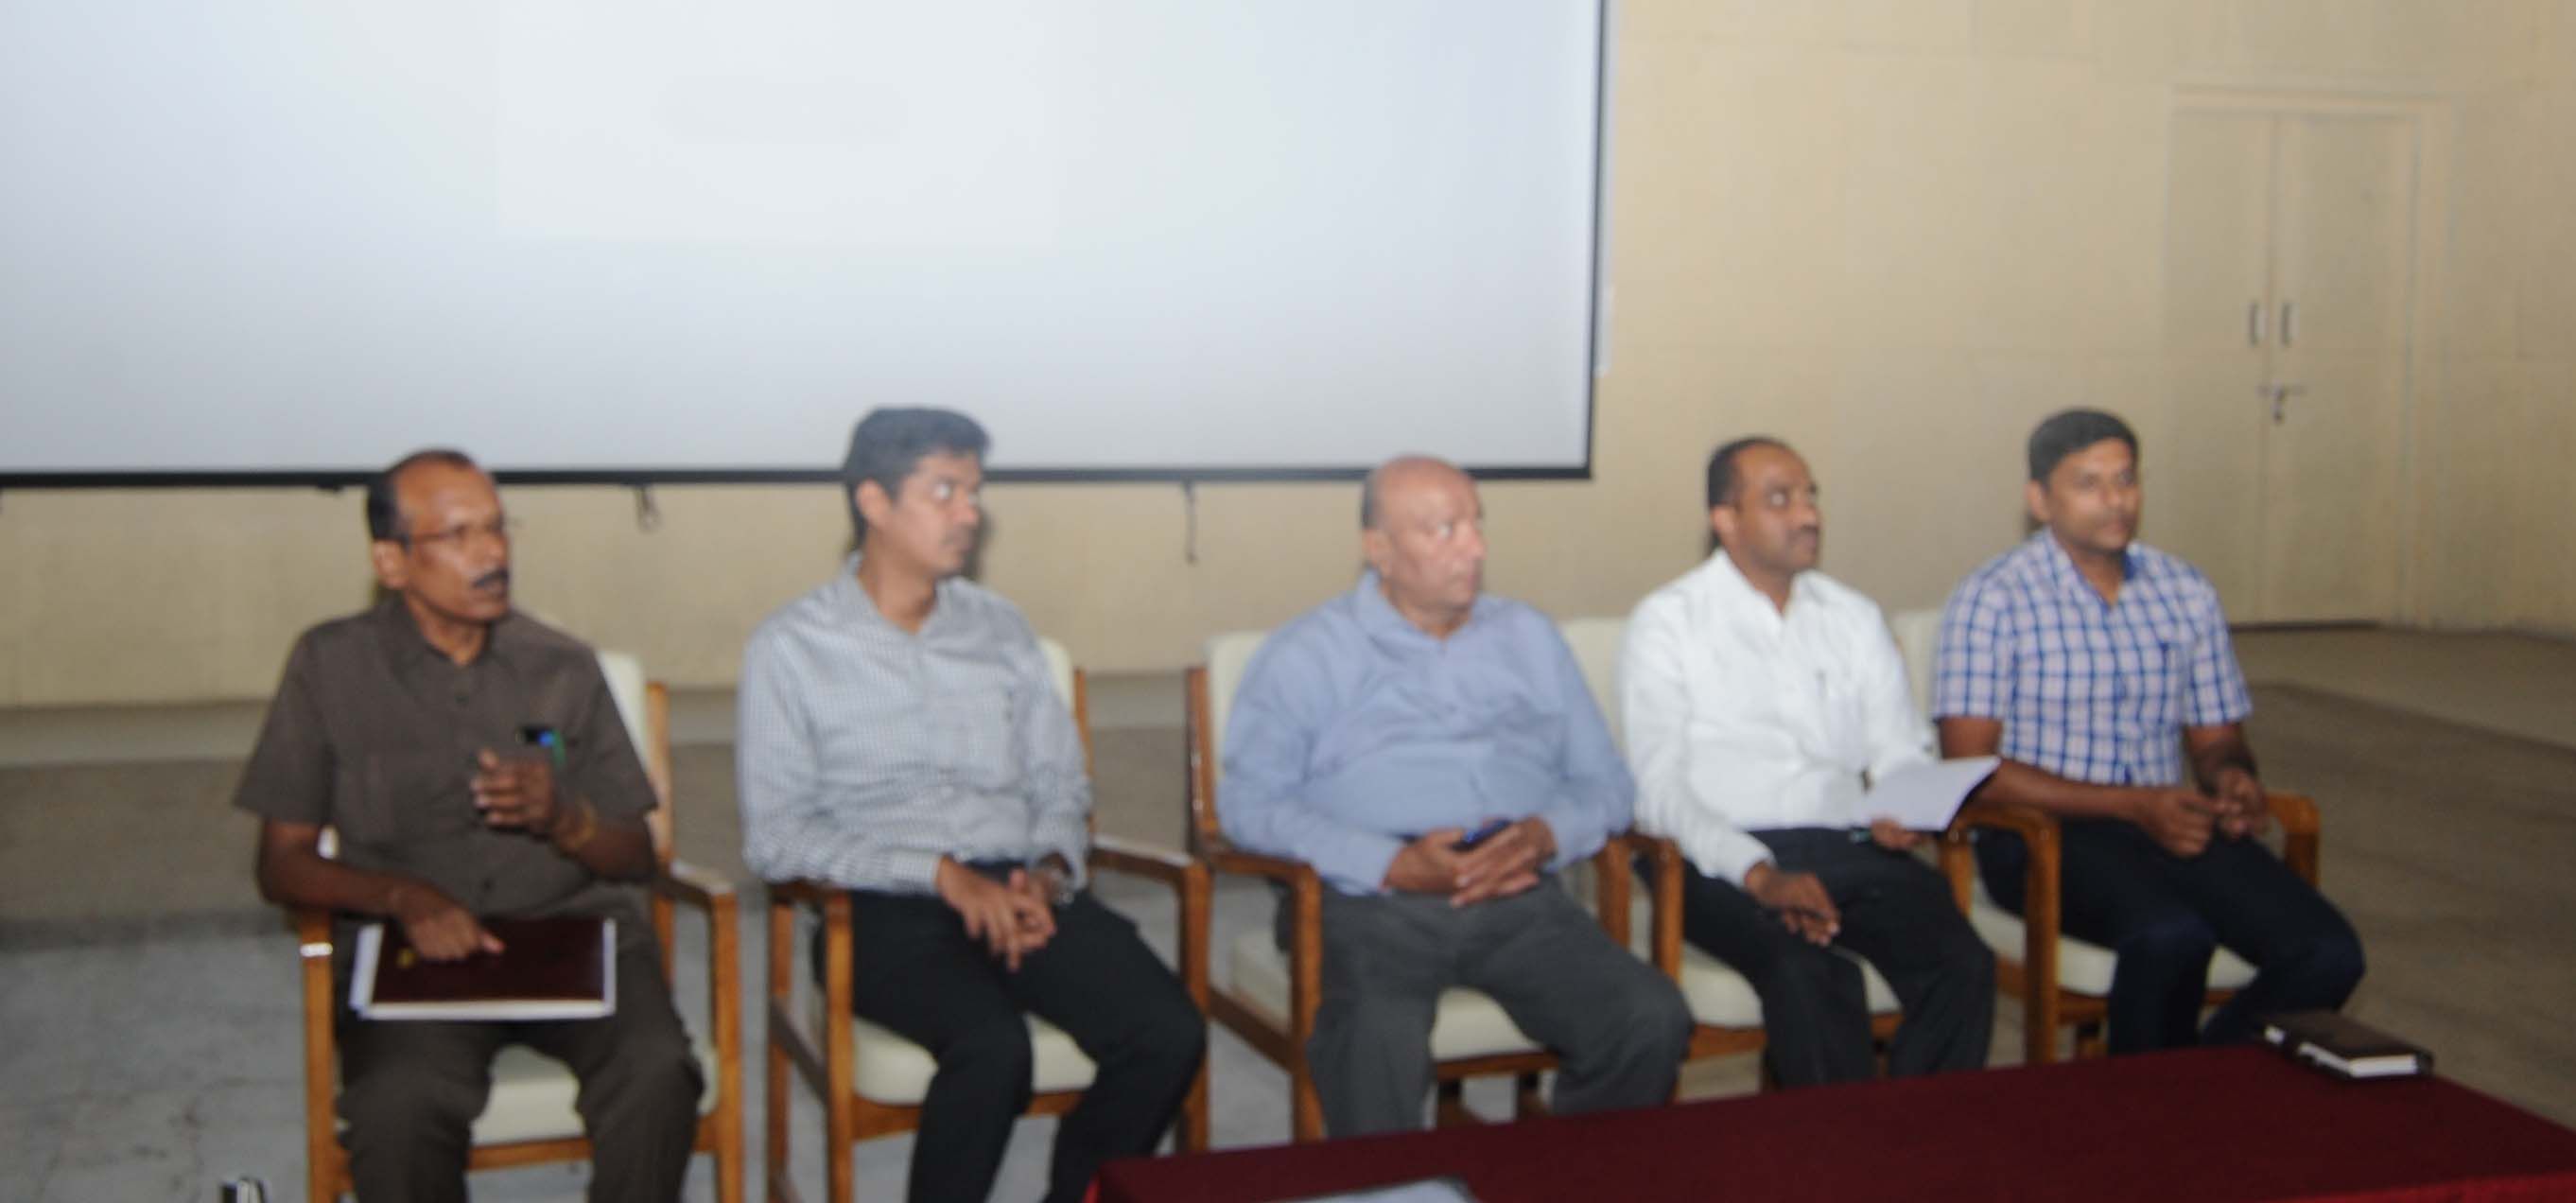 Madurai parliamentary general observer and District collector/Returning officer interacting at a preparatory meet with zonal officers on Madurai north-world Tamil sangam campus at 05.04.2019